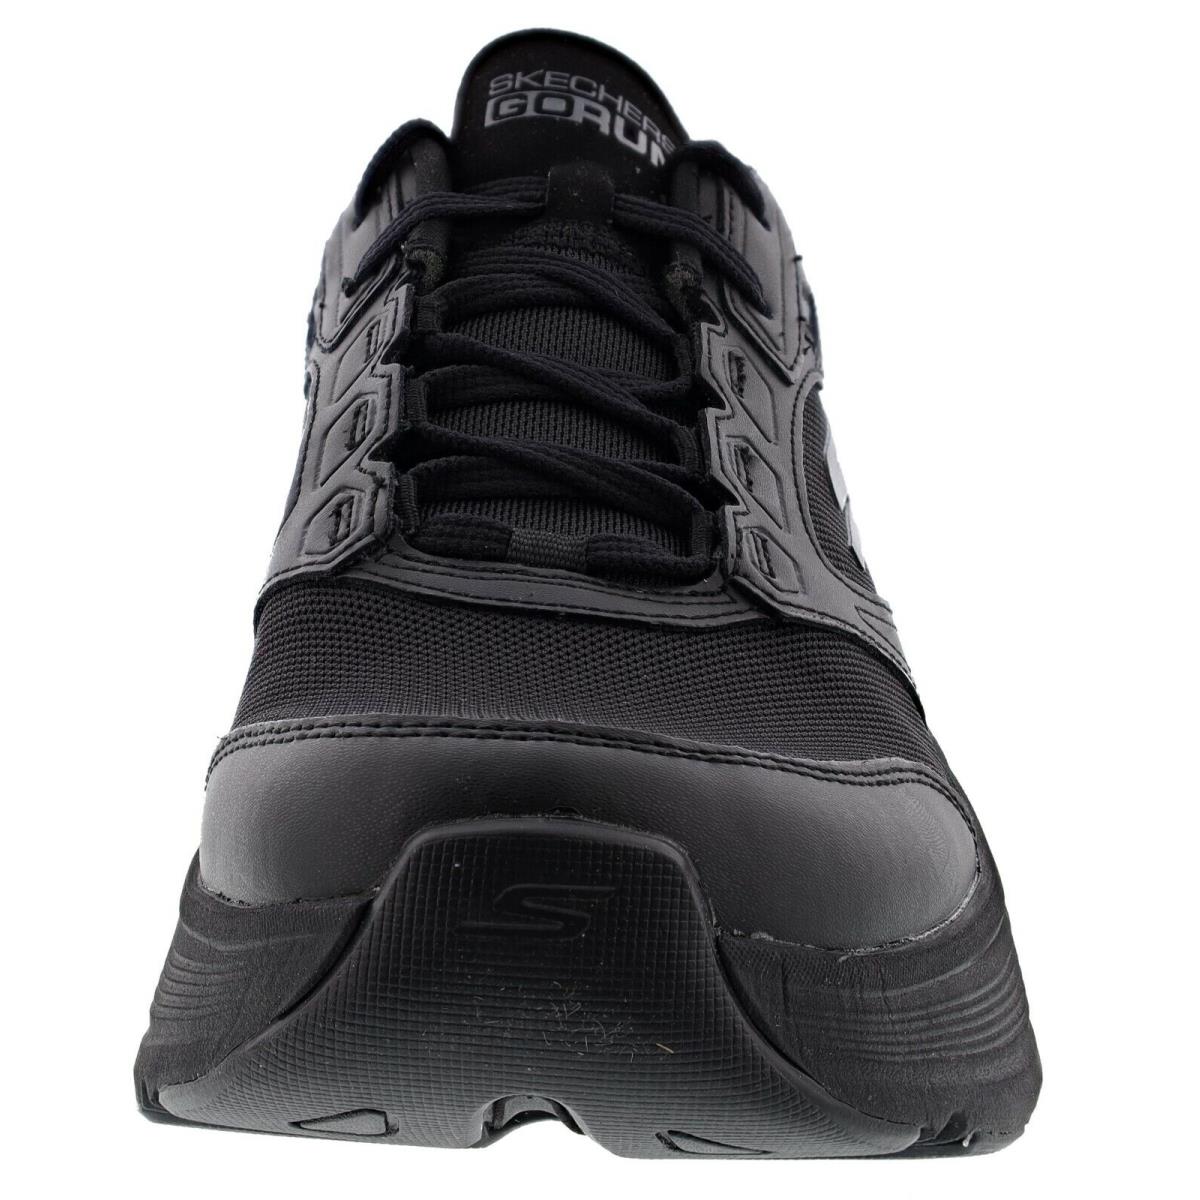 Skechers shoes Arch Rugged Man 1